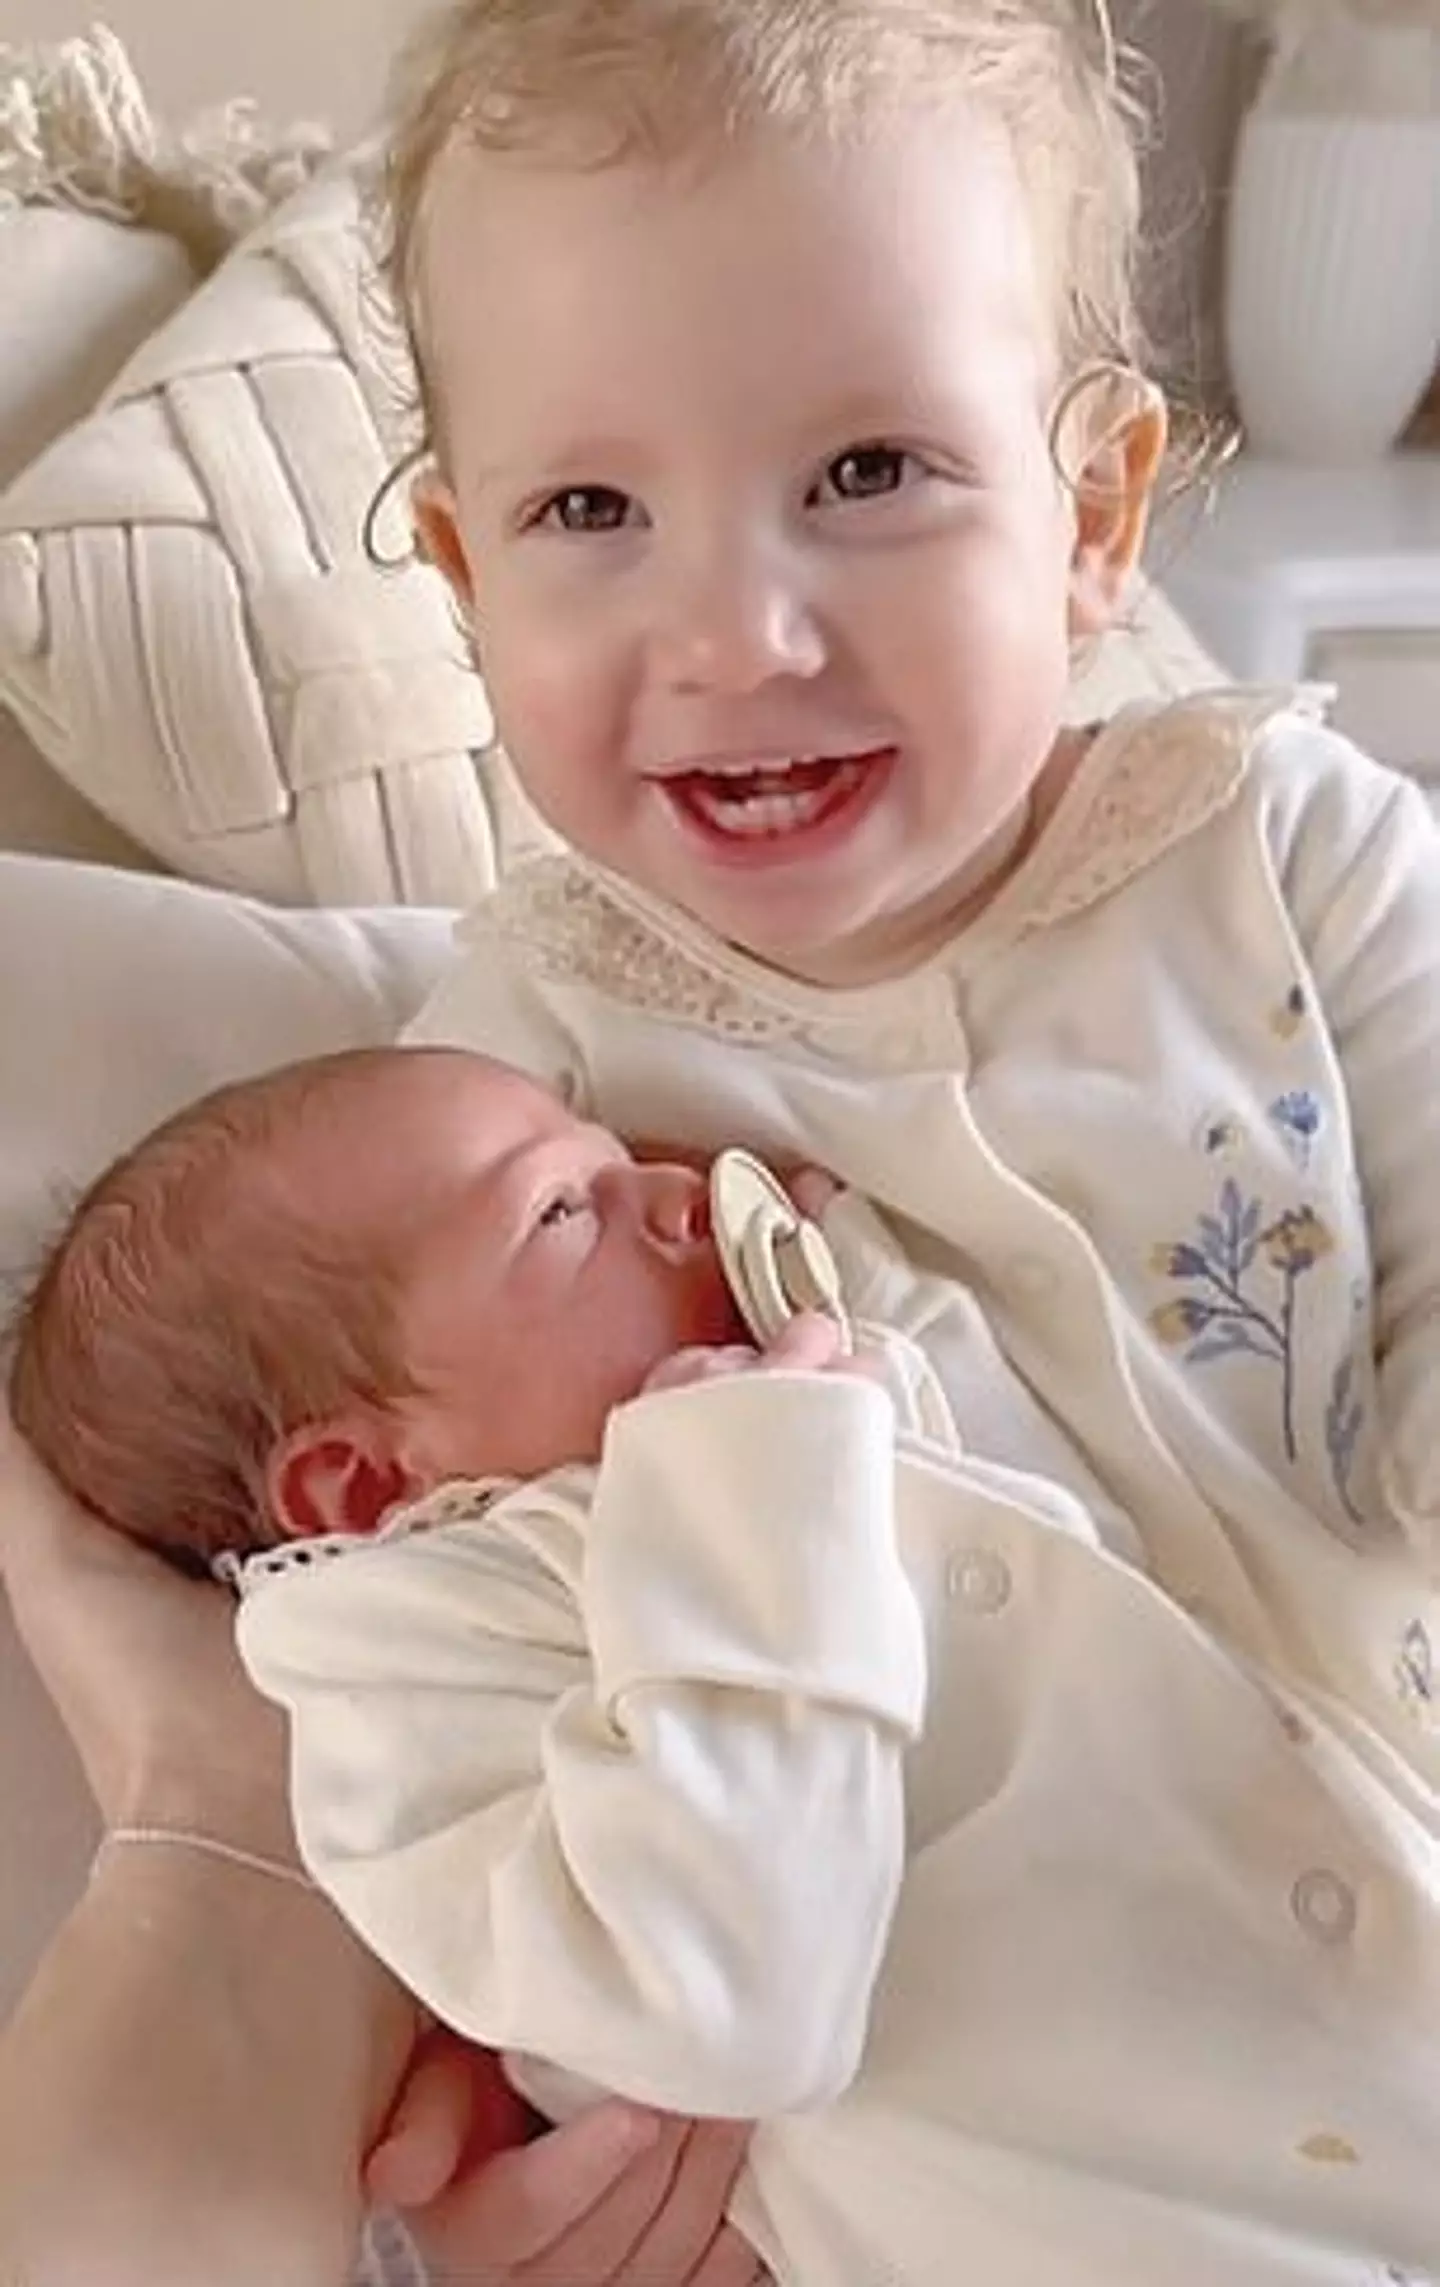 The two siblings were clearly getting along in what will probably be the most heartwarming video you'll see today.